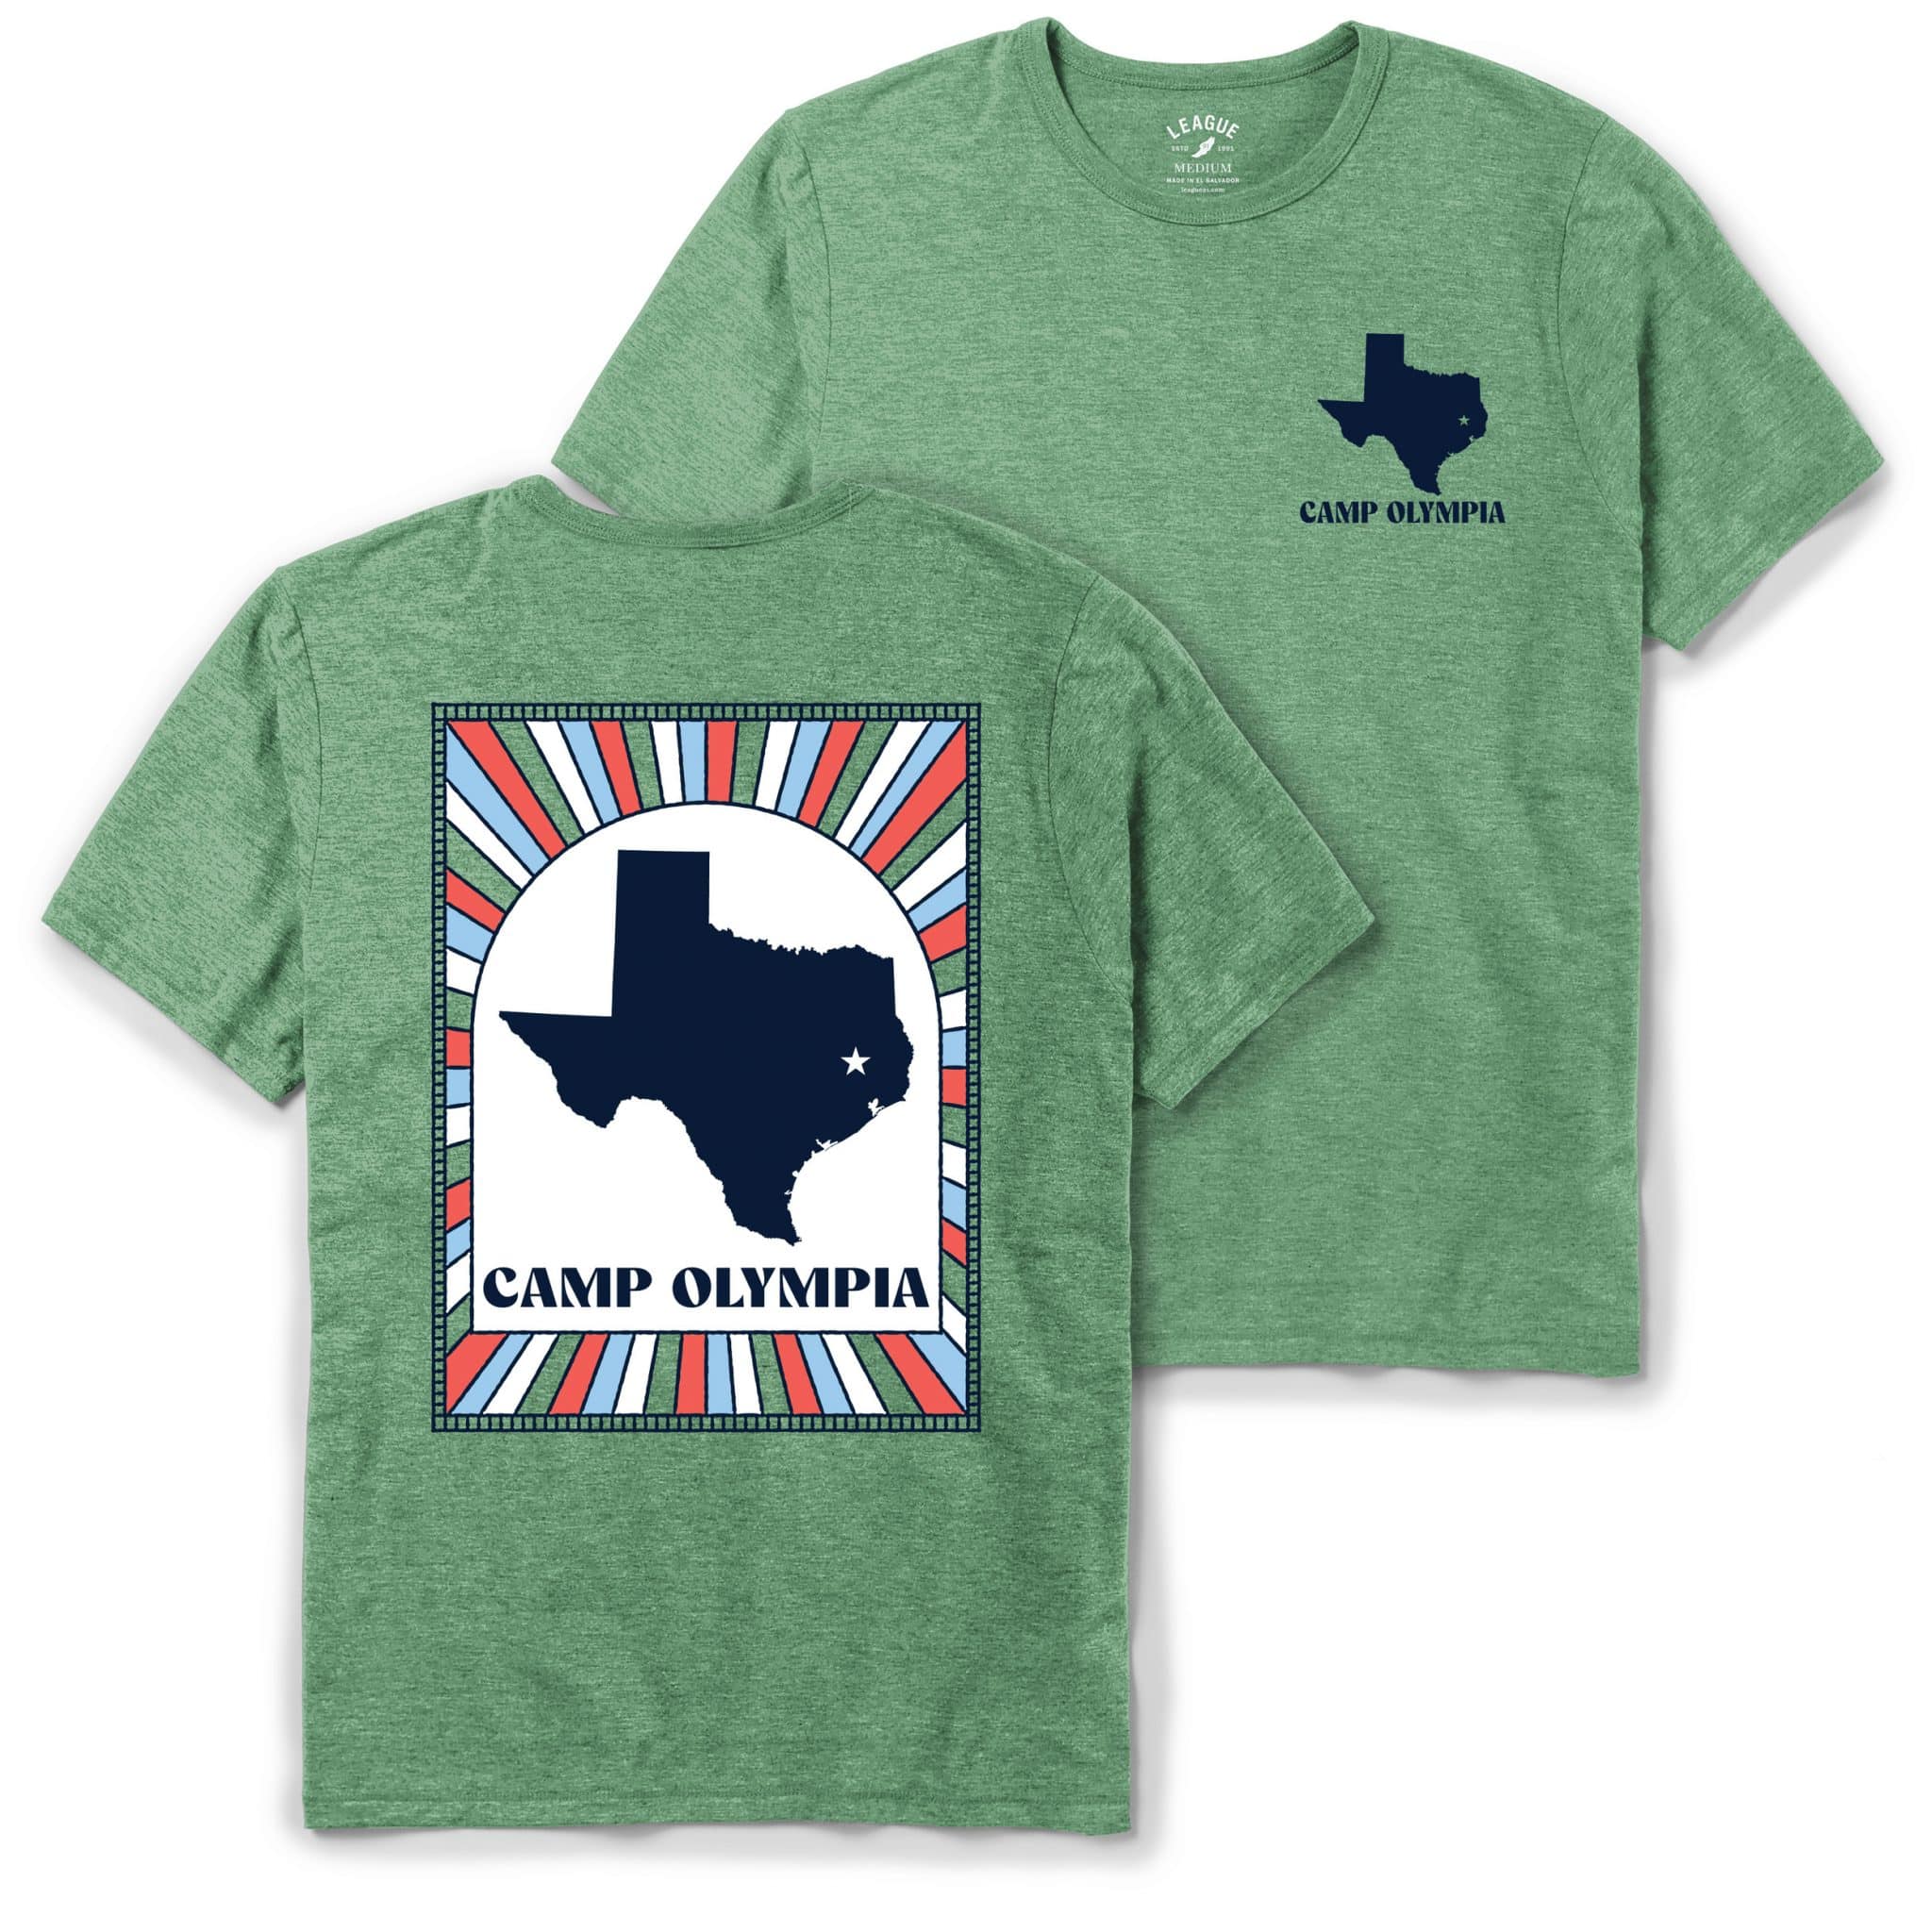 Camp Olympia Green T-shirt with Shape of Texas